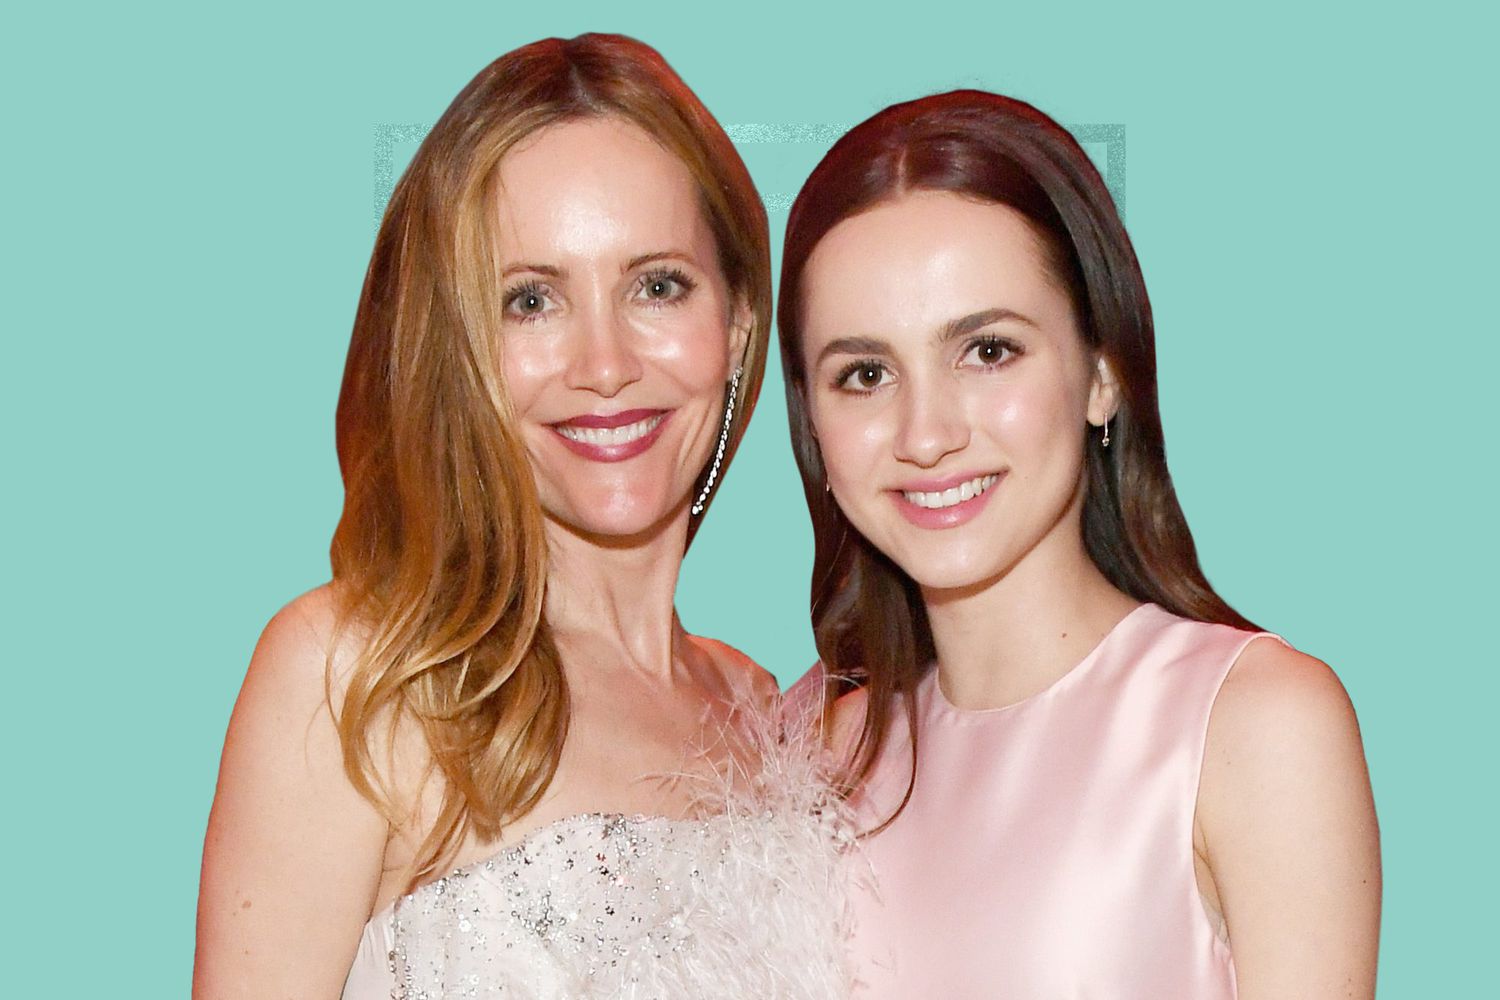 Leslie Mann with her daughter Maude Apatow at a Vanity Fair Event against a teal background